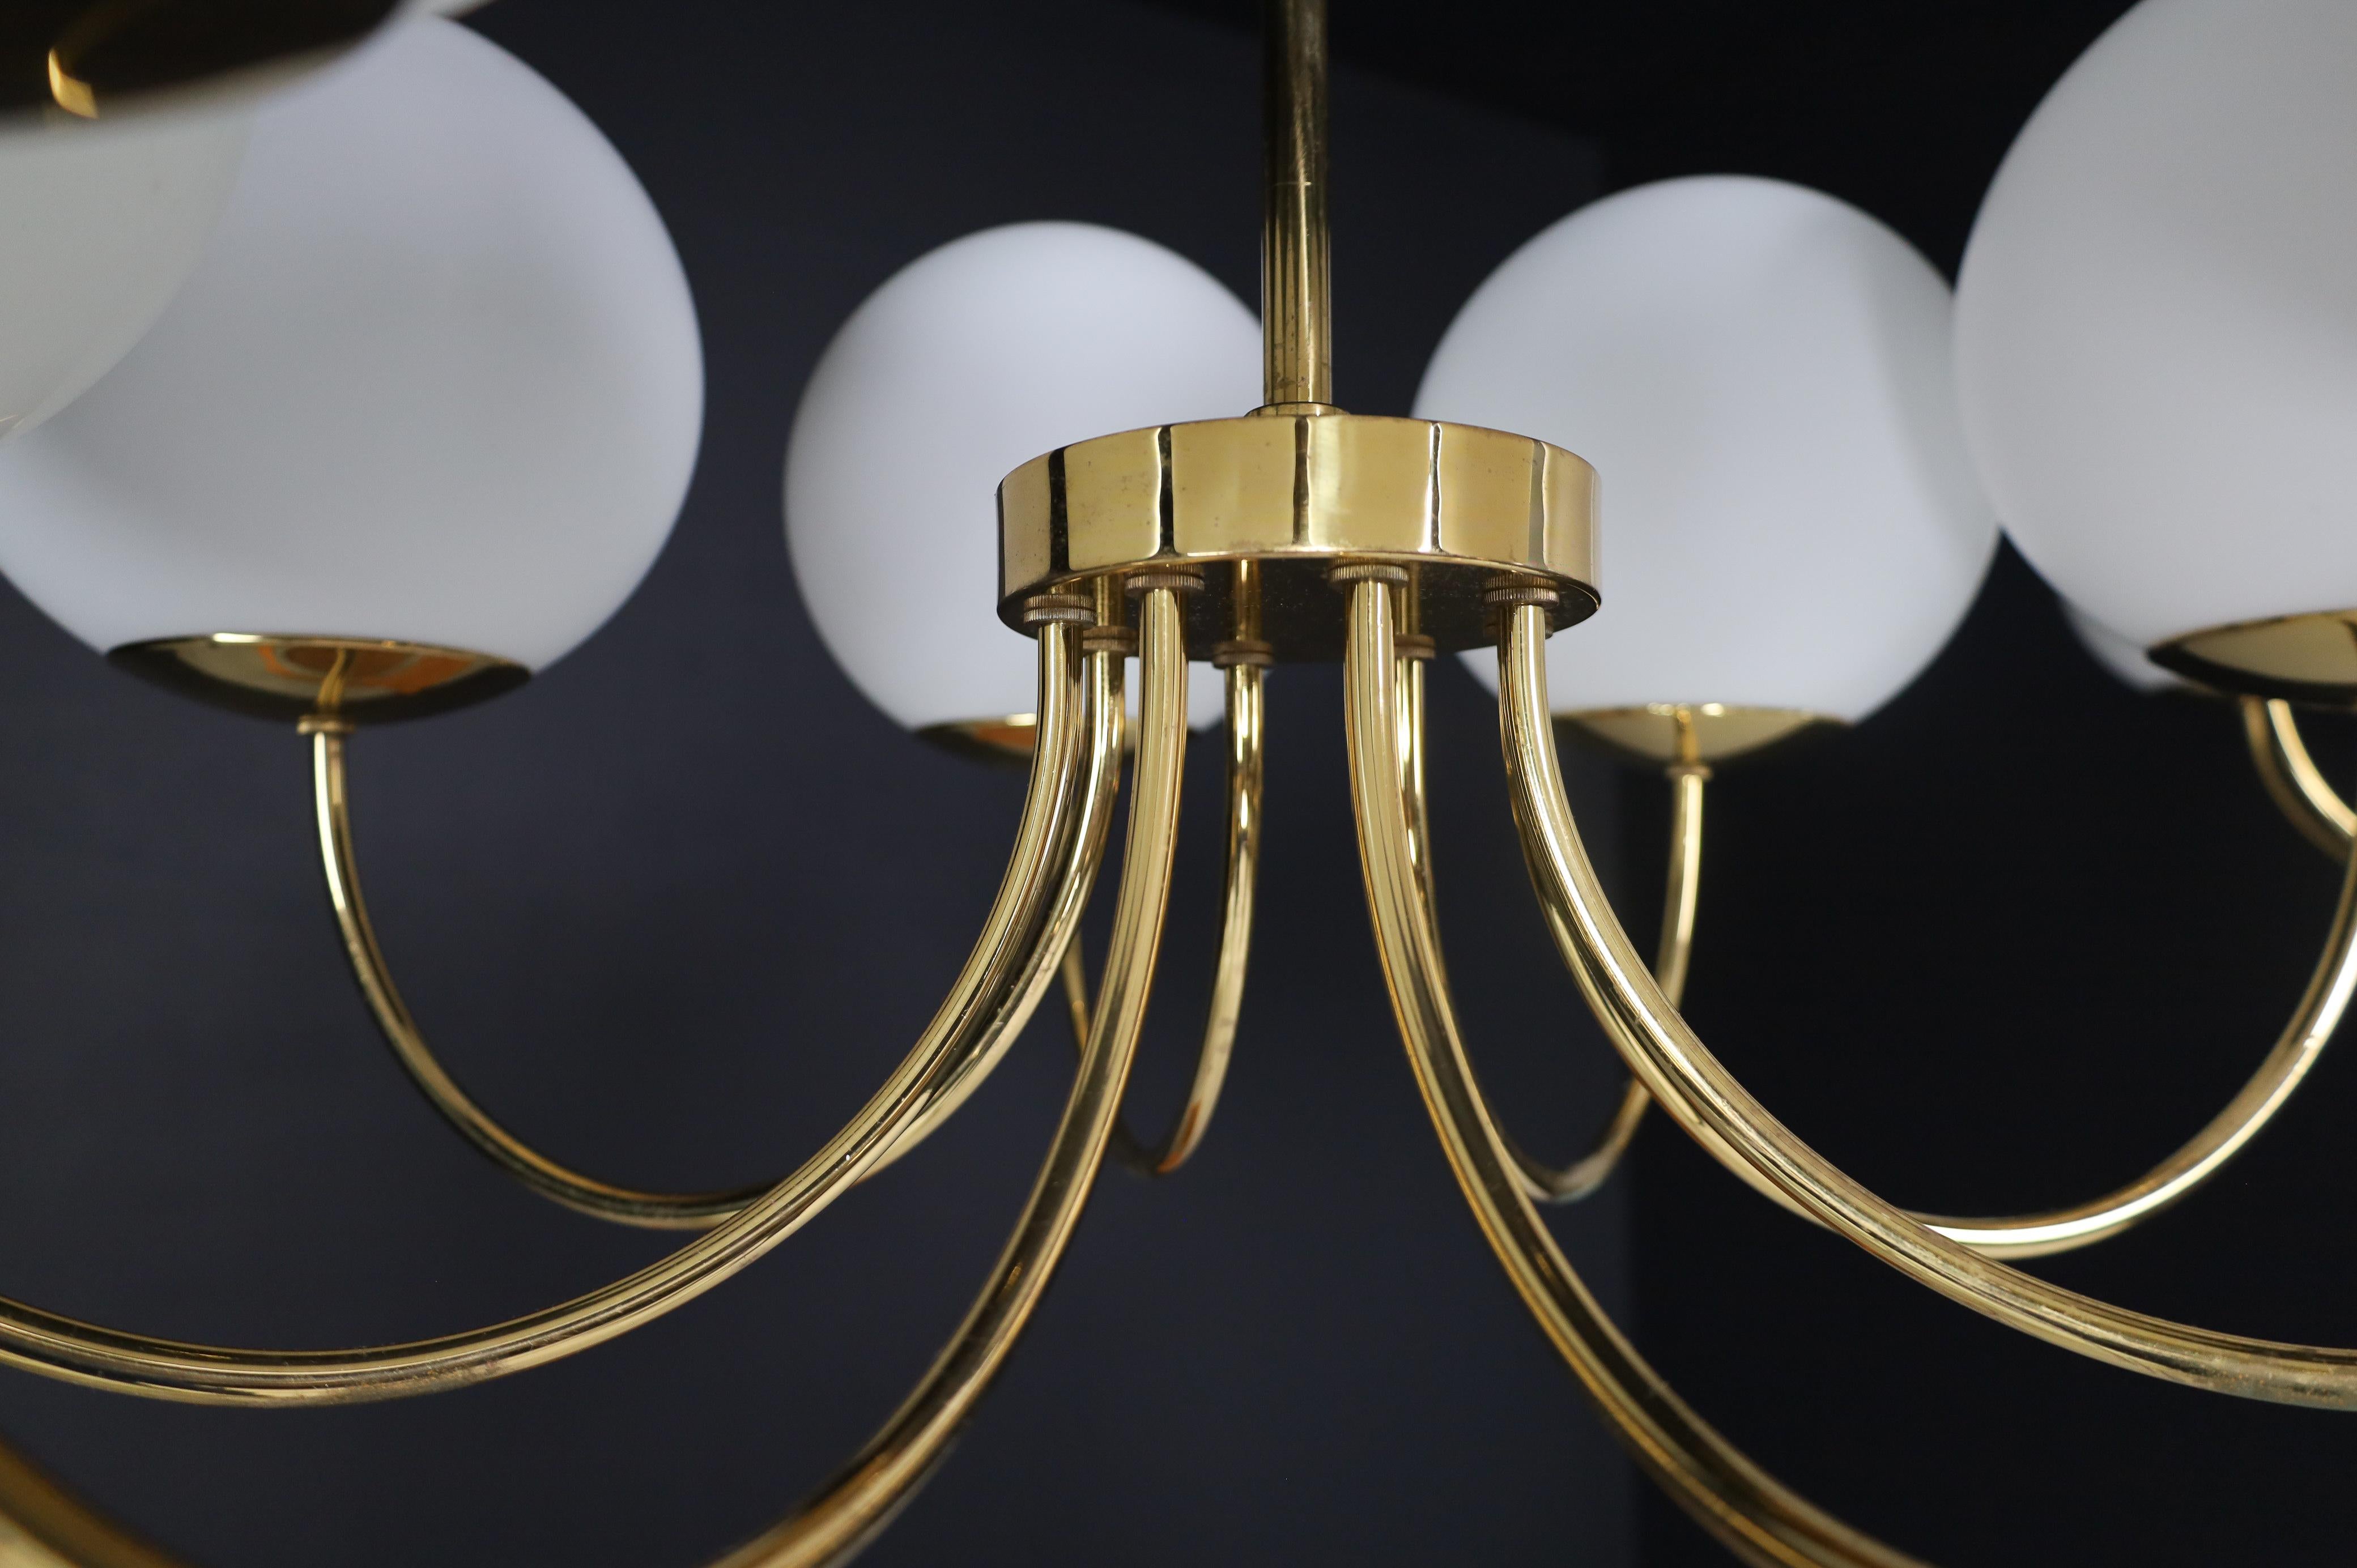 1 of 3 Elegant Chandeliers with Brass Fixture and Opaline Glass Globes, 1960s For Sale 10